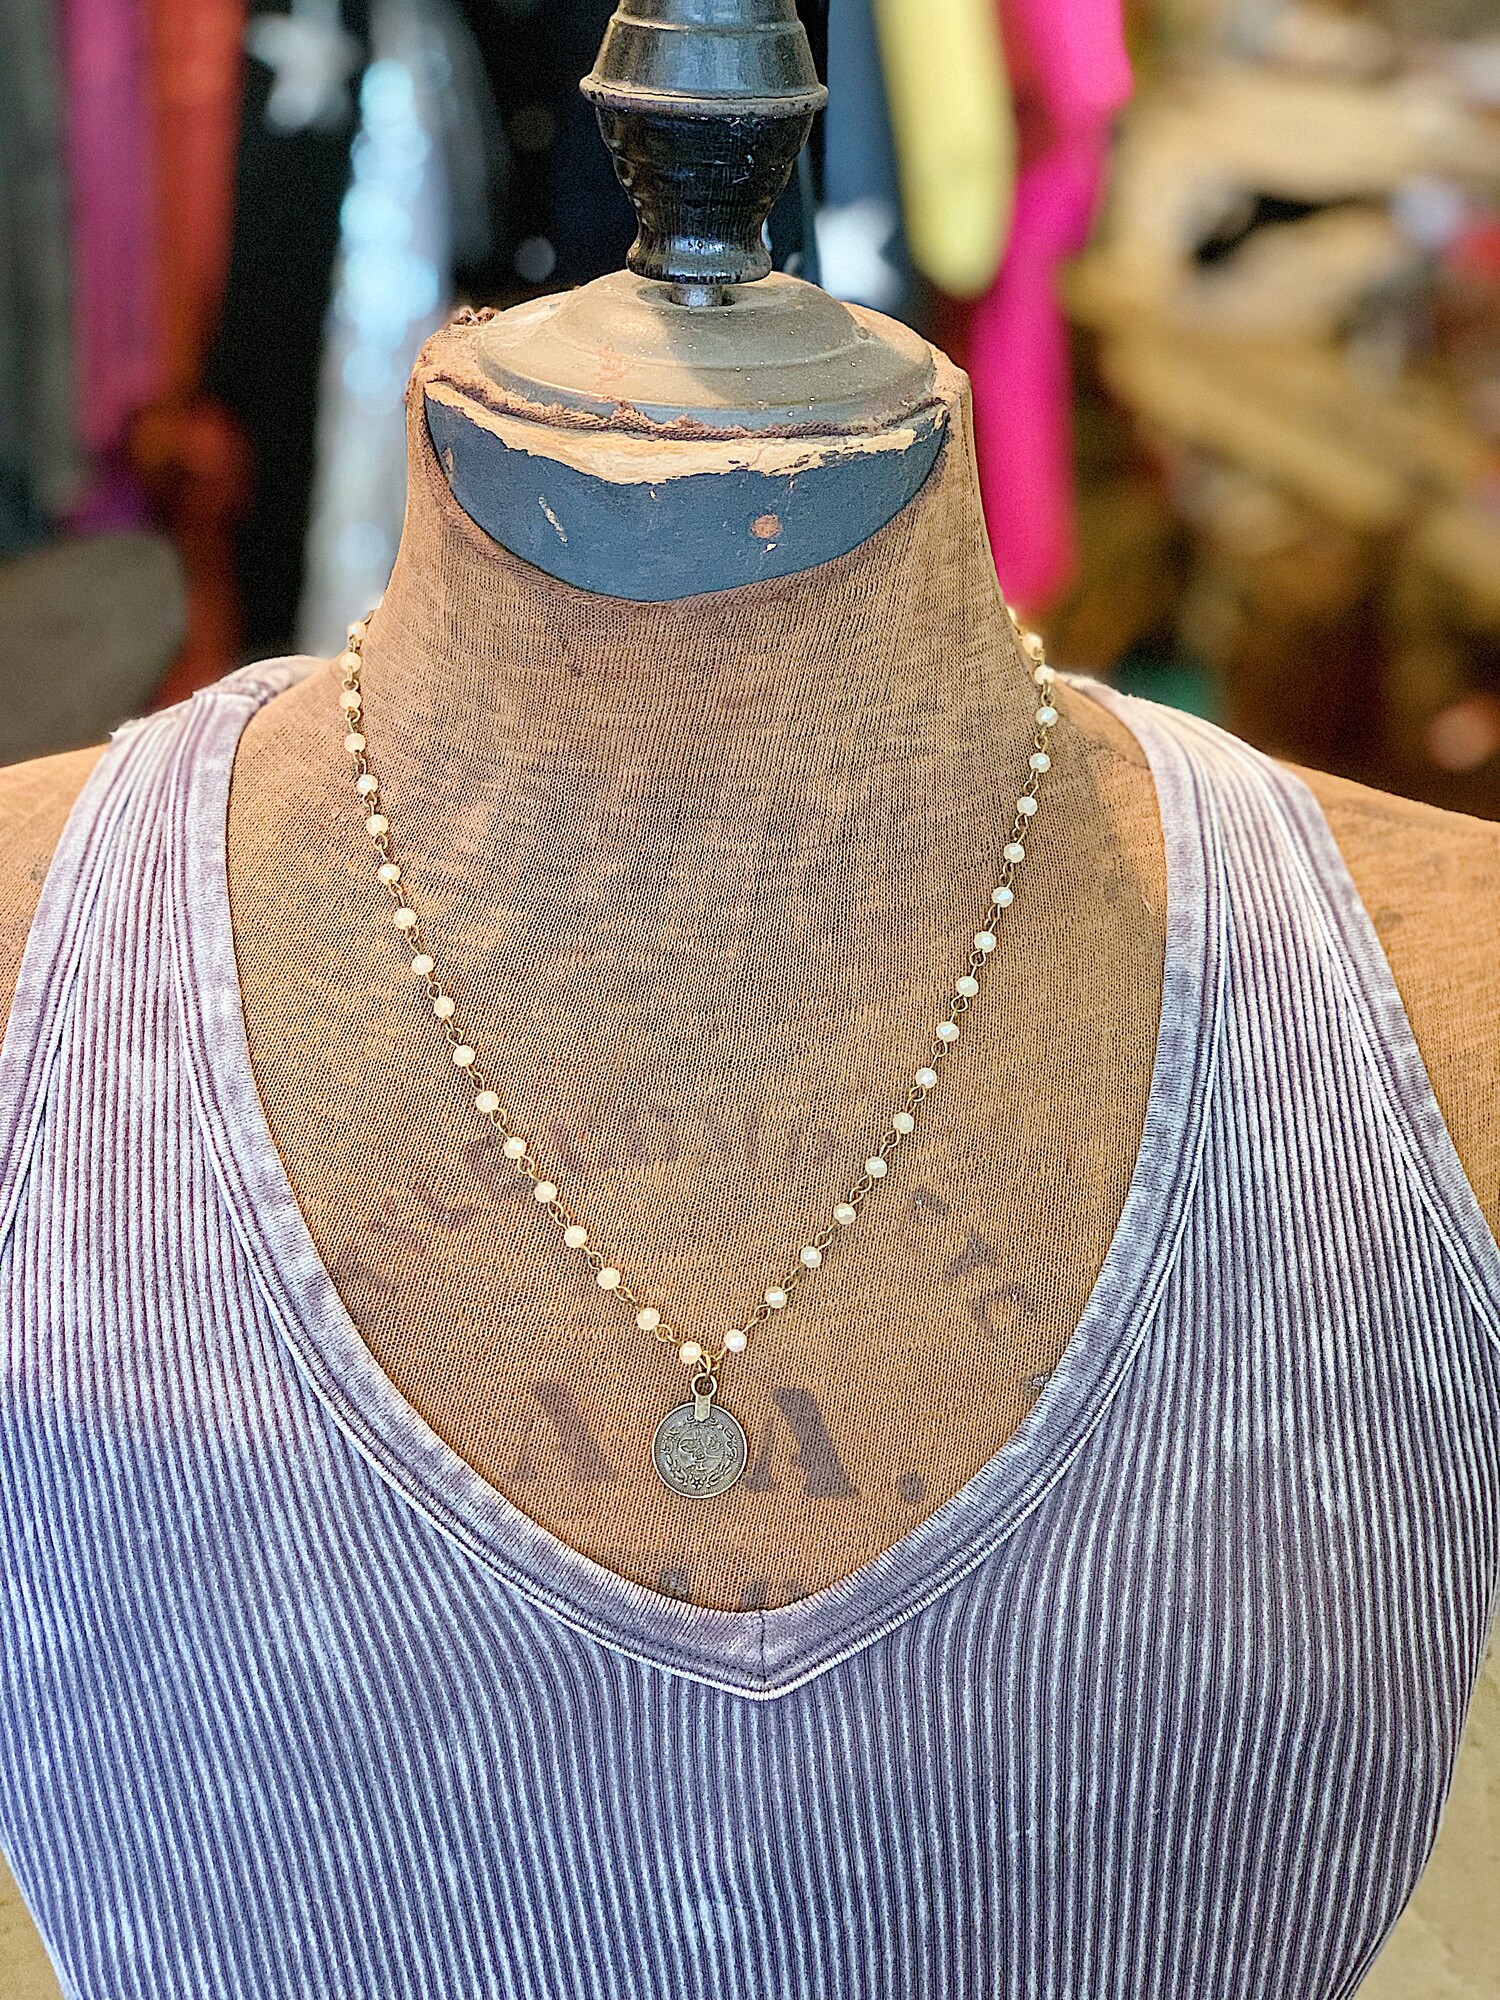 This beautiful necklace is on a 18 inch beaded chain with a 2 inch extender chain!